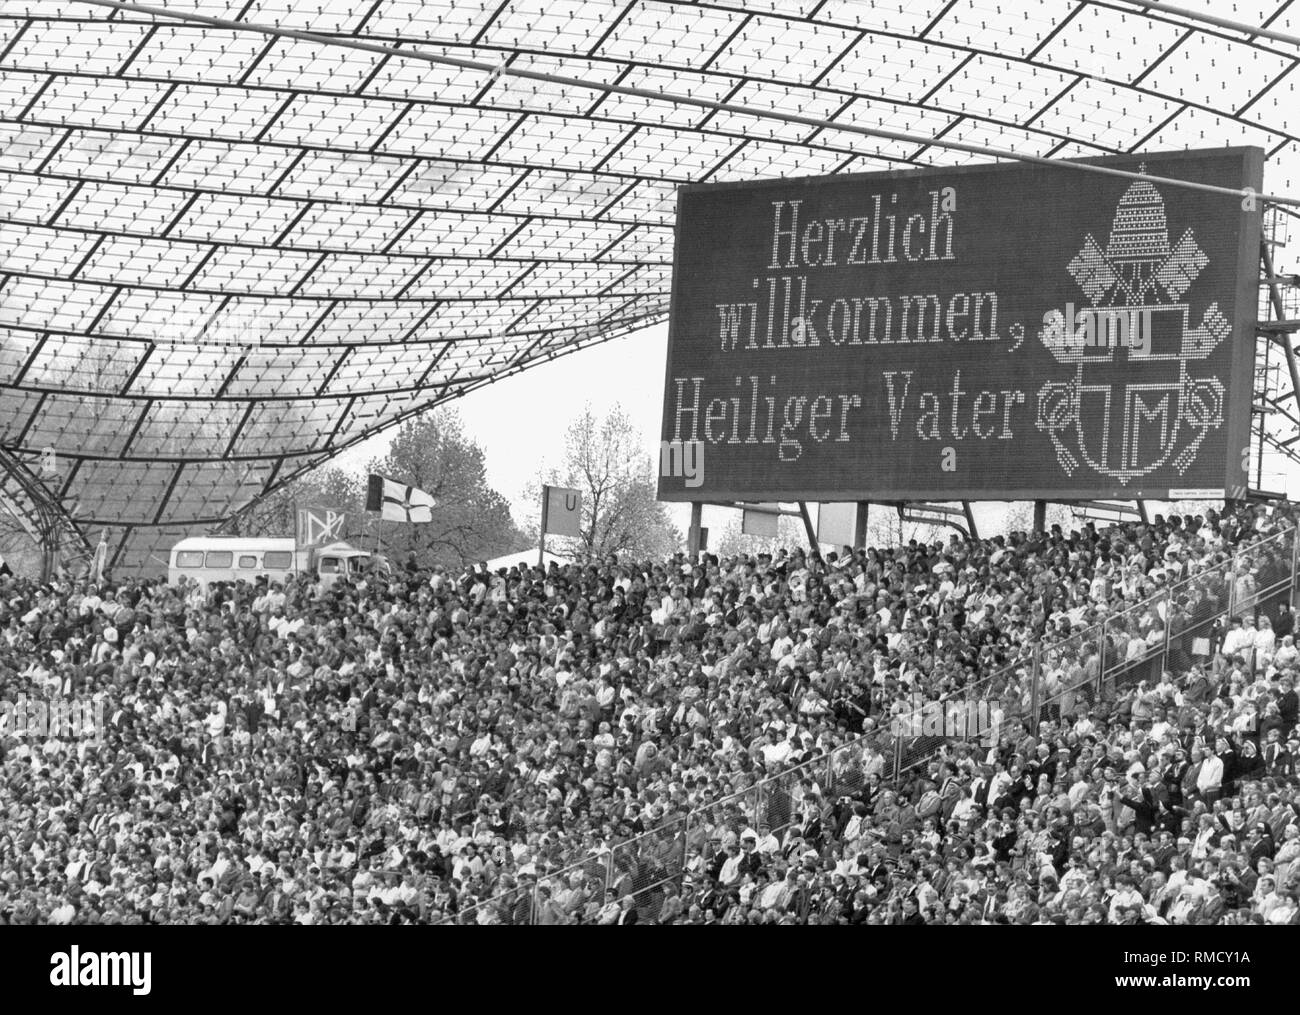 During his second visit to Germany, Pope John Paul II  beatified the Jesuit priest Rupert Mayer, who had been persecuted by the Nazis, at the Olympic Stadium Munich. On the scoreboard (English translation) 'Welcome Holy Father'. Stock Photo